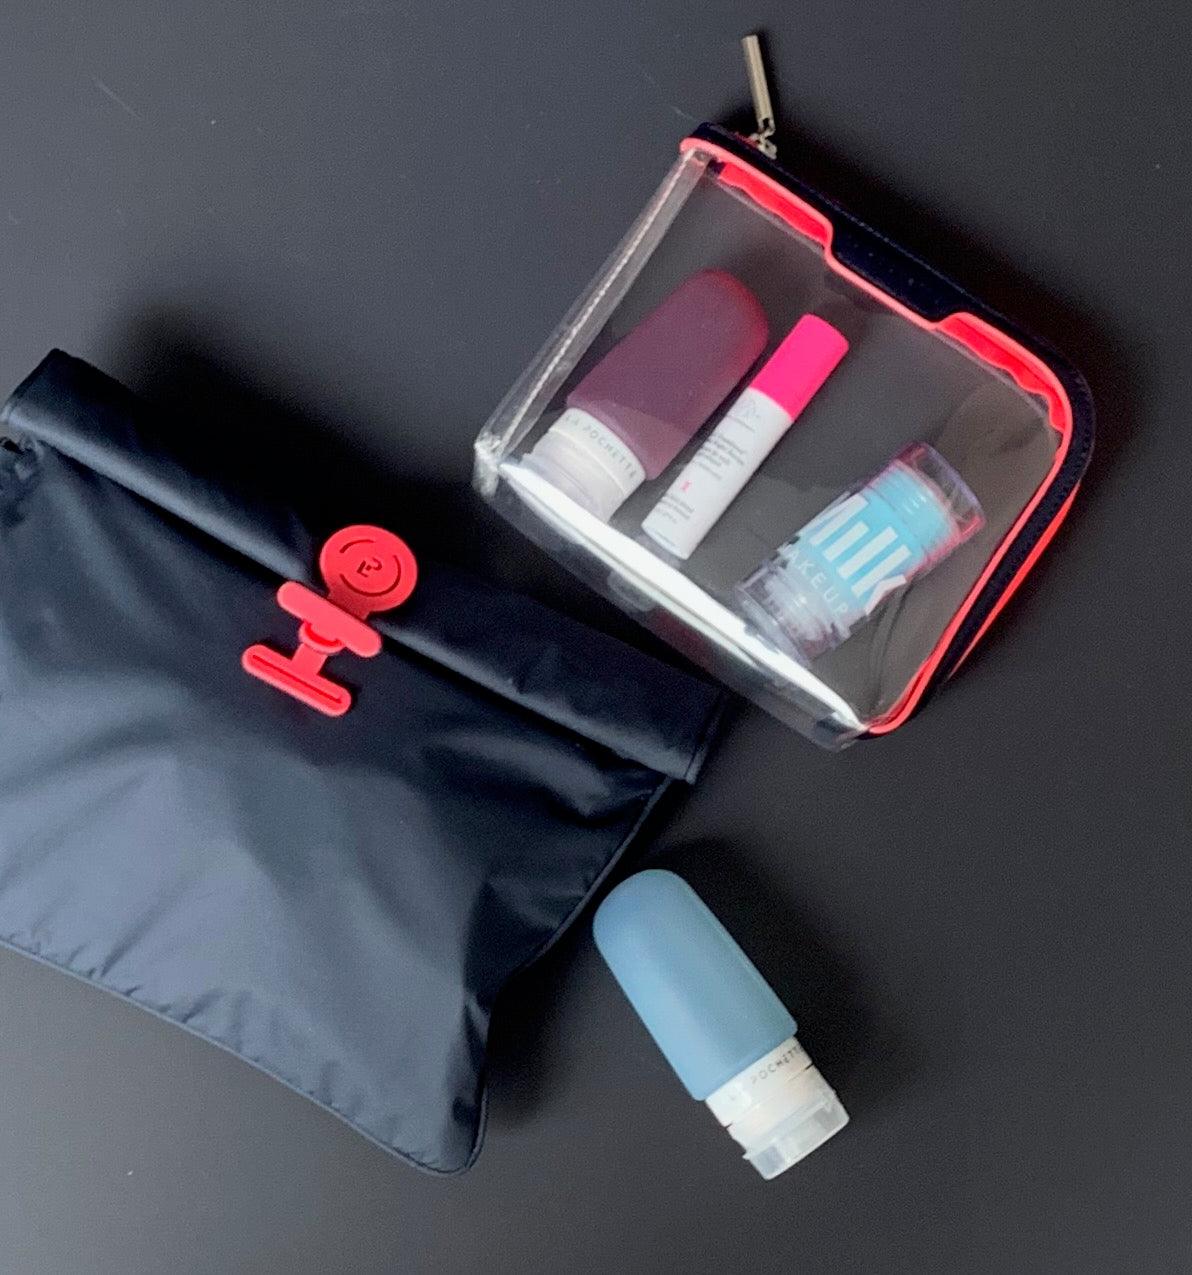 Small Anywhere Everywhere Pouch in Midnight Neon Pink colourway containing beauty accessories and La Pochette silicone travel bottle, next to Small Wet Bag in Midnight Neon Pink colourway